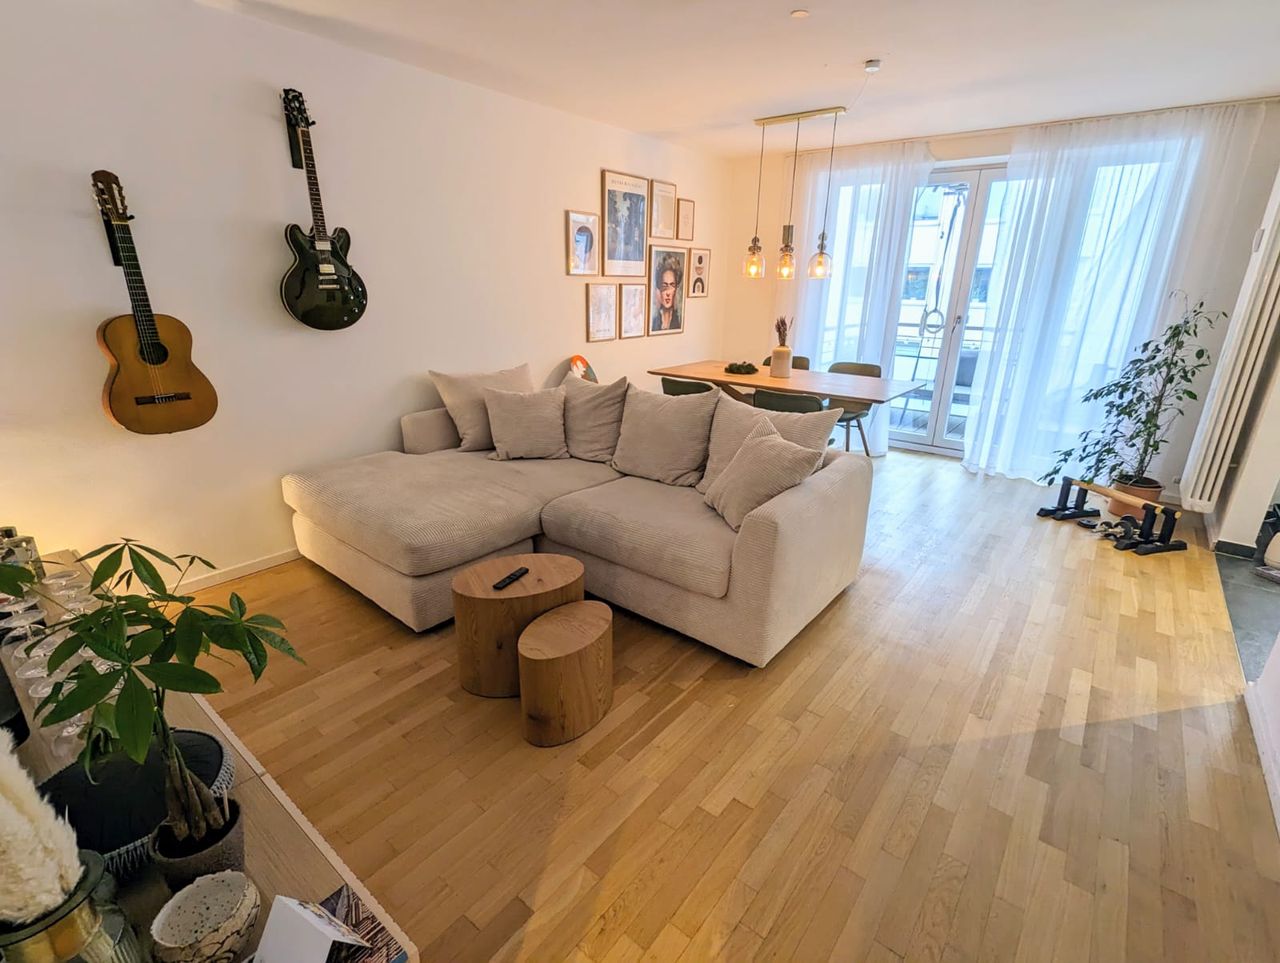 Fully furnished design apartment in the center of Munich